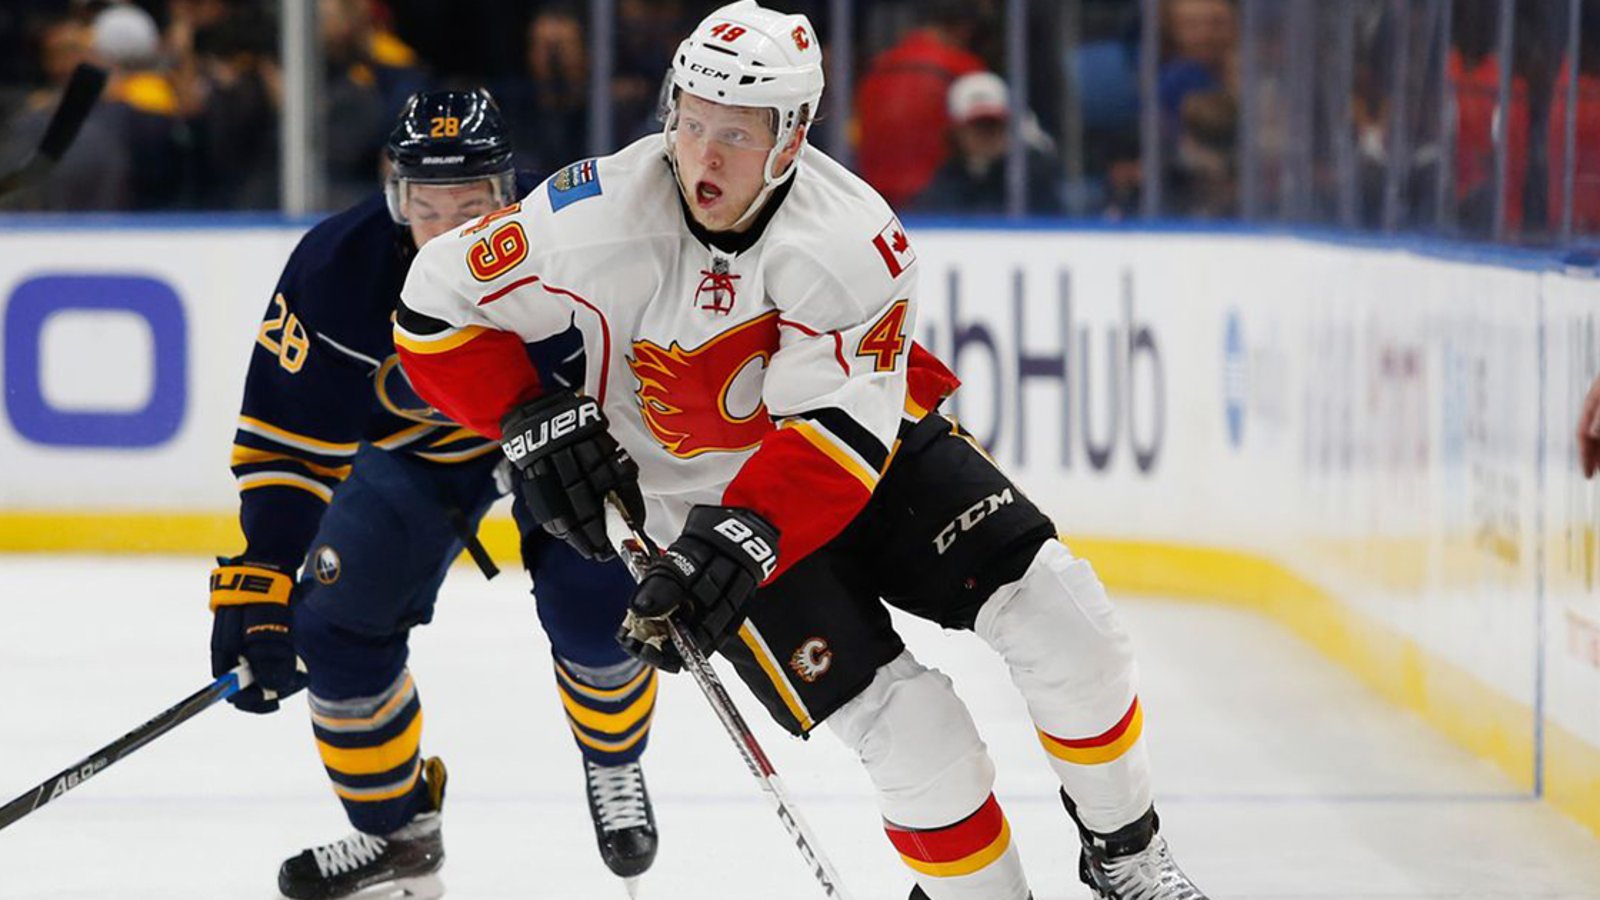 Breaking: Flames trio passed through waivers unclaimed